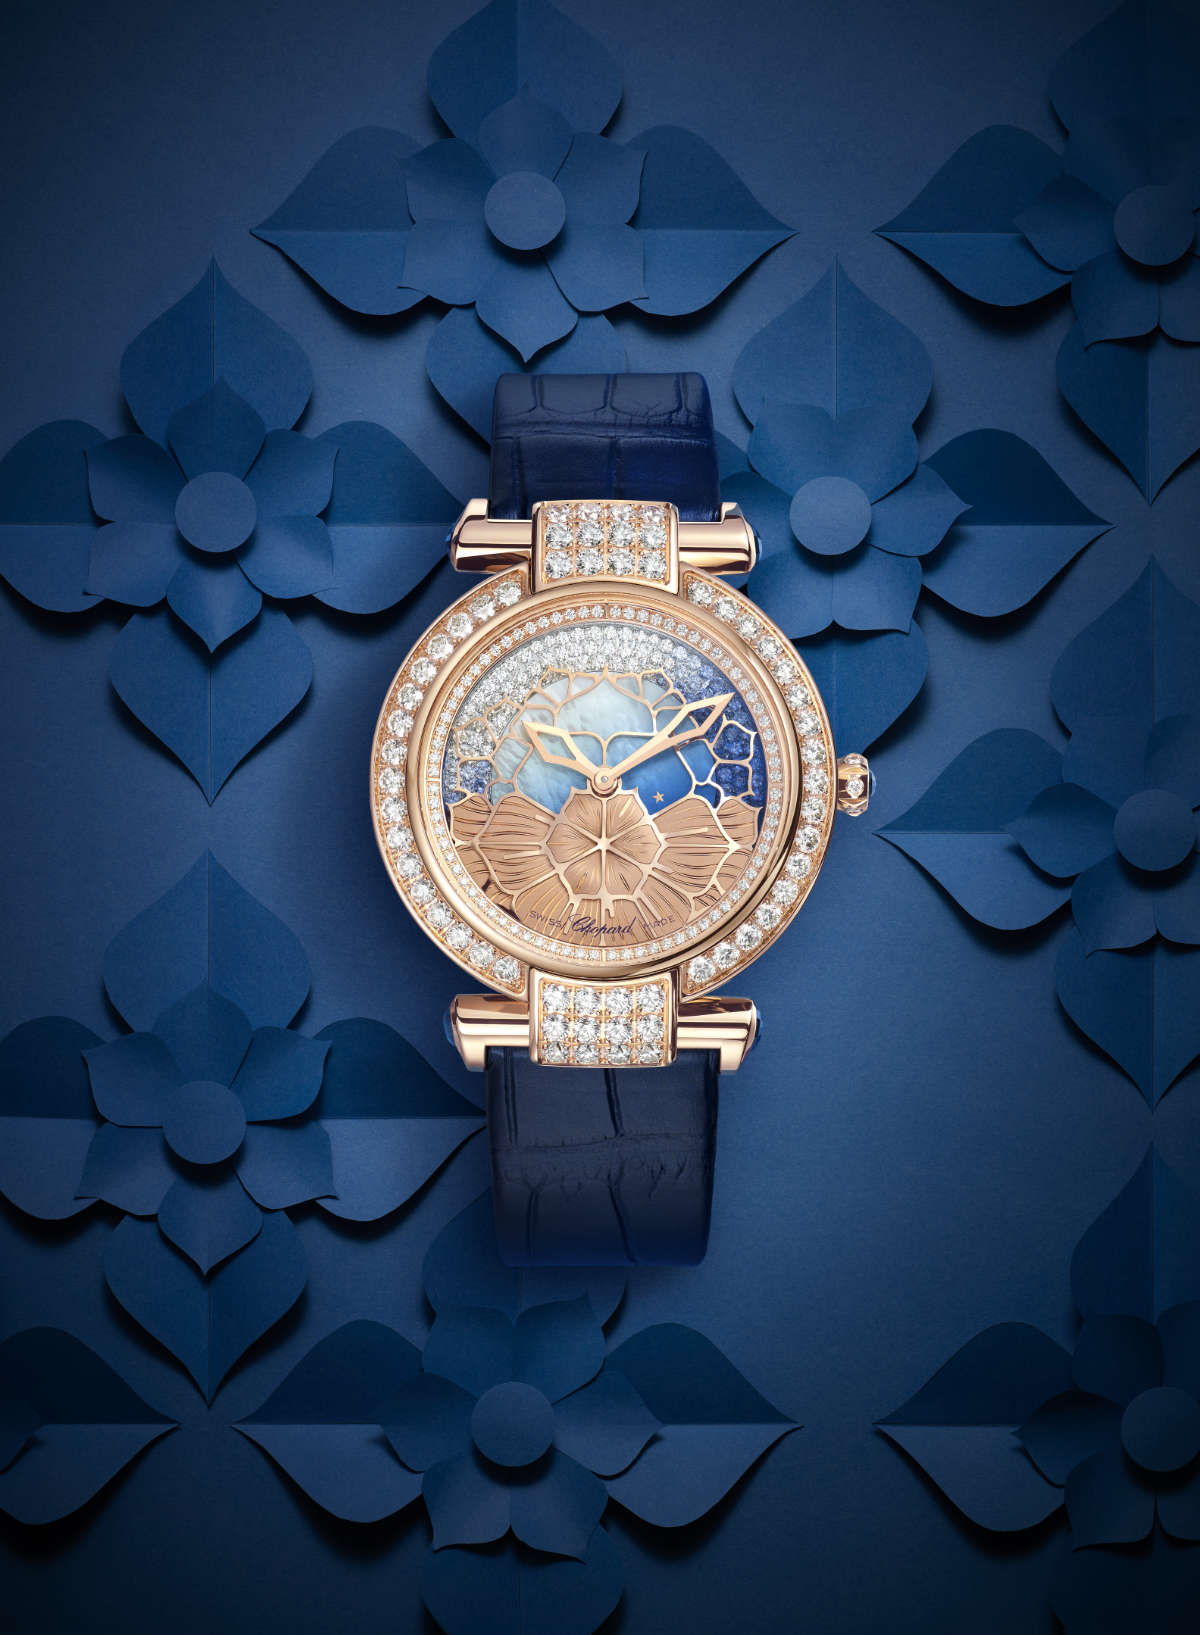 Chopard's Imperiale collection enriched with a limited numbered edition of 25 timepieces